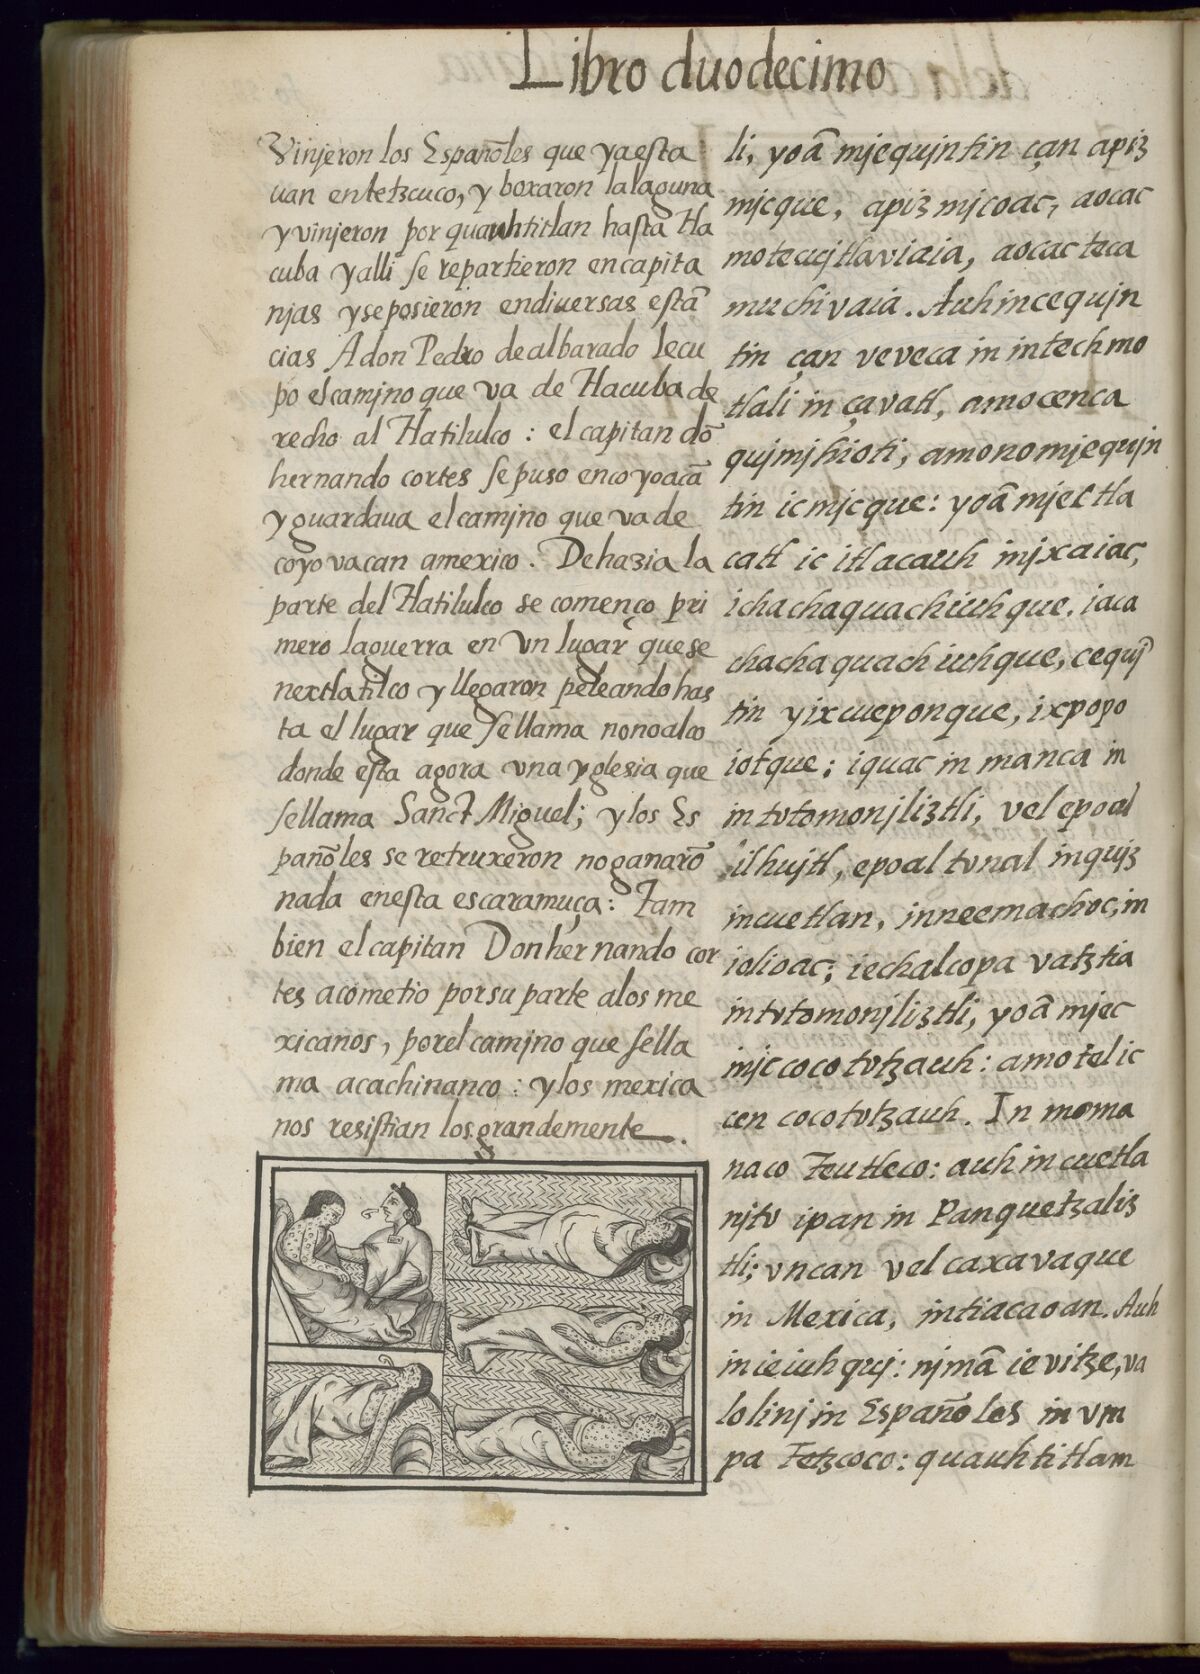 A page from Book 12 of the Florentine Codex records an early smallpox epidemic